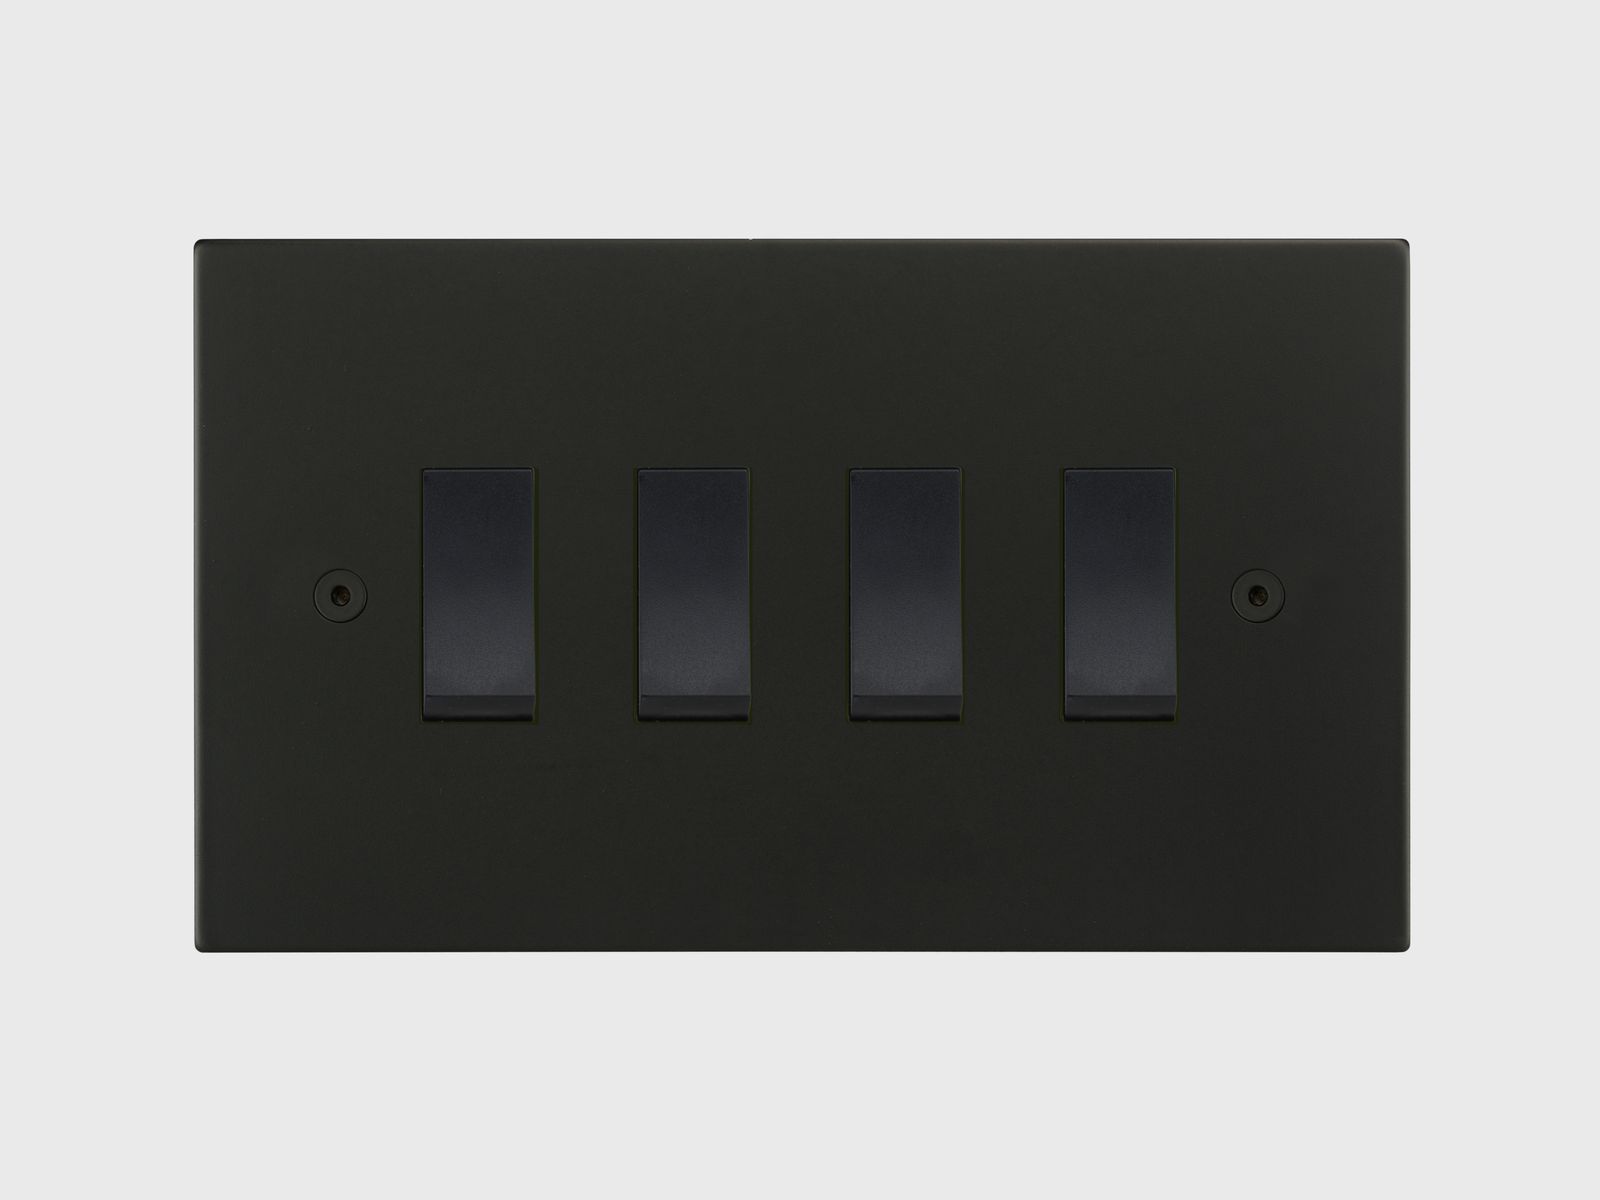 Horizon square faceplate style matt black finish is selected by HBA Residential